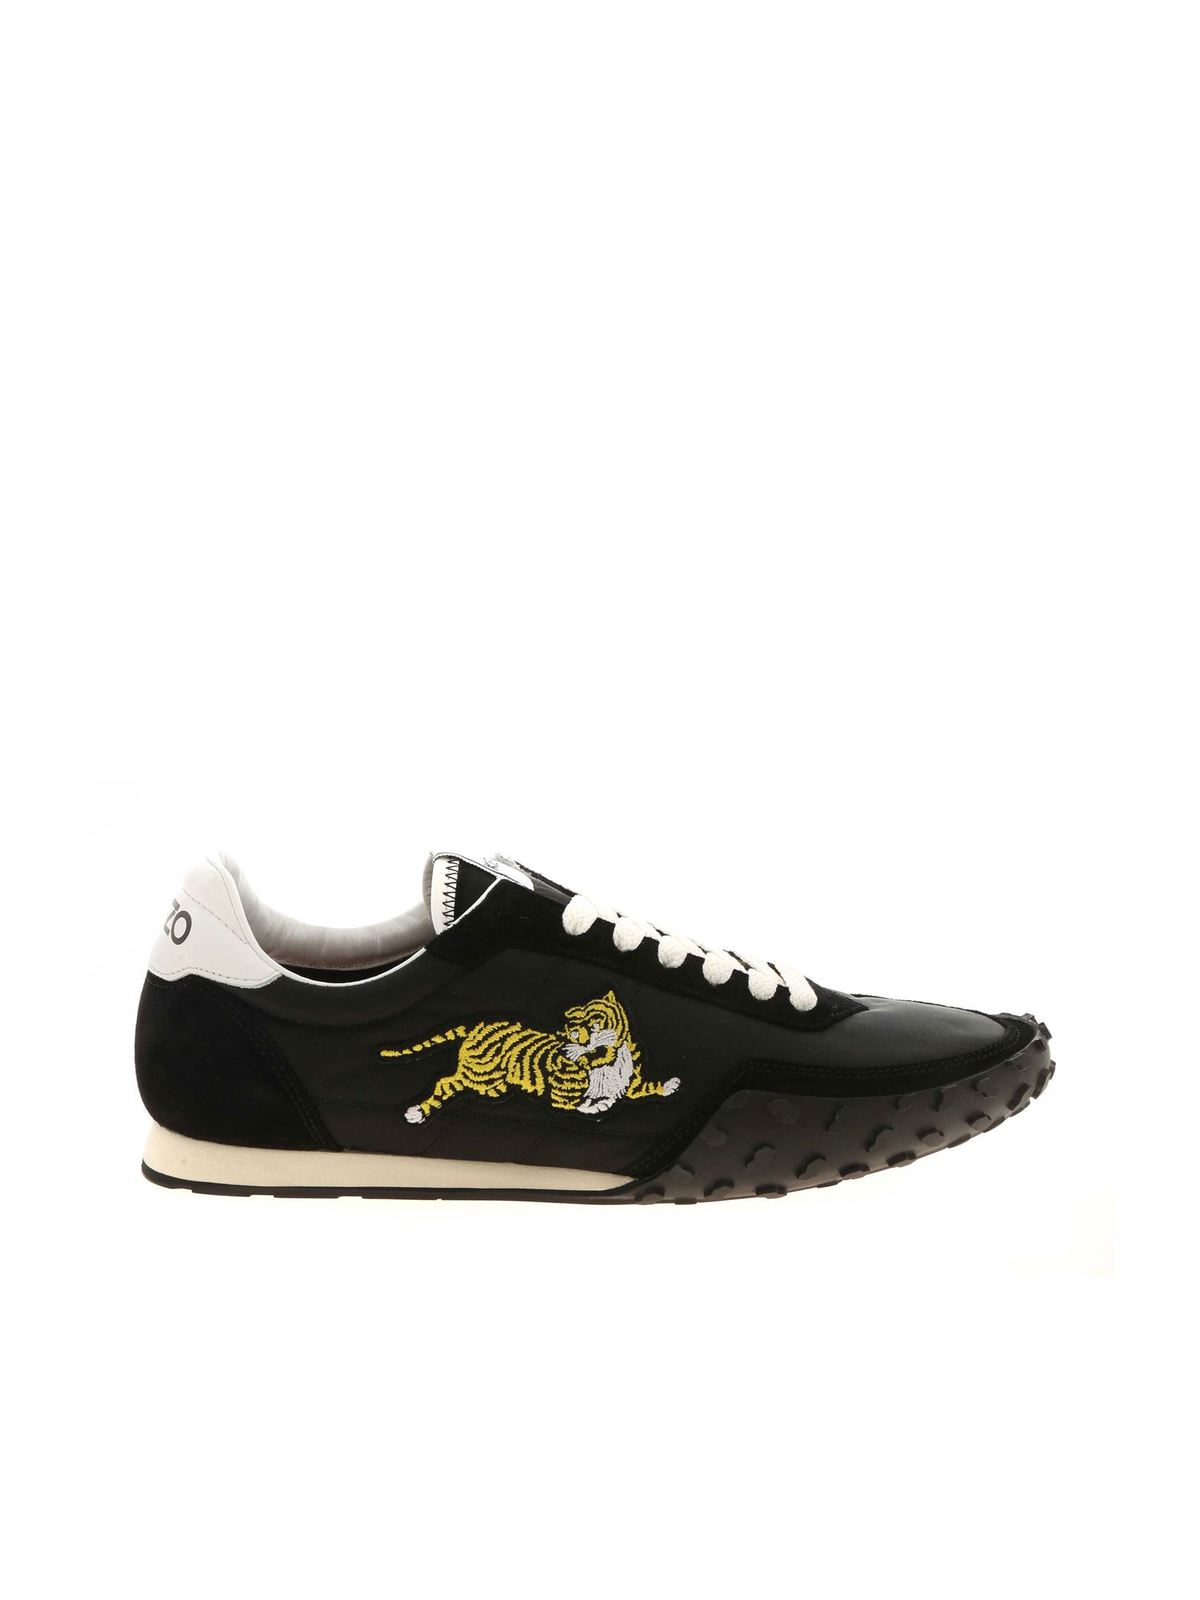 Trainers Kenzo - Tiger embroidery sneakers in black 5SN122F5499